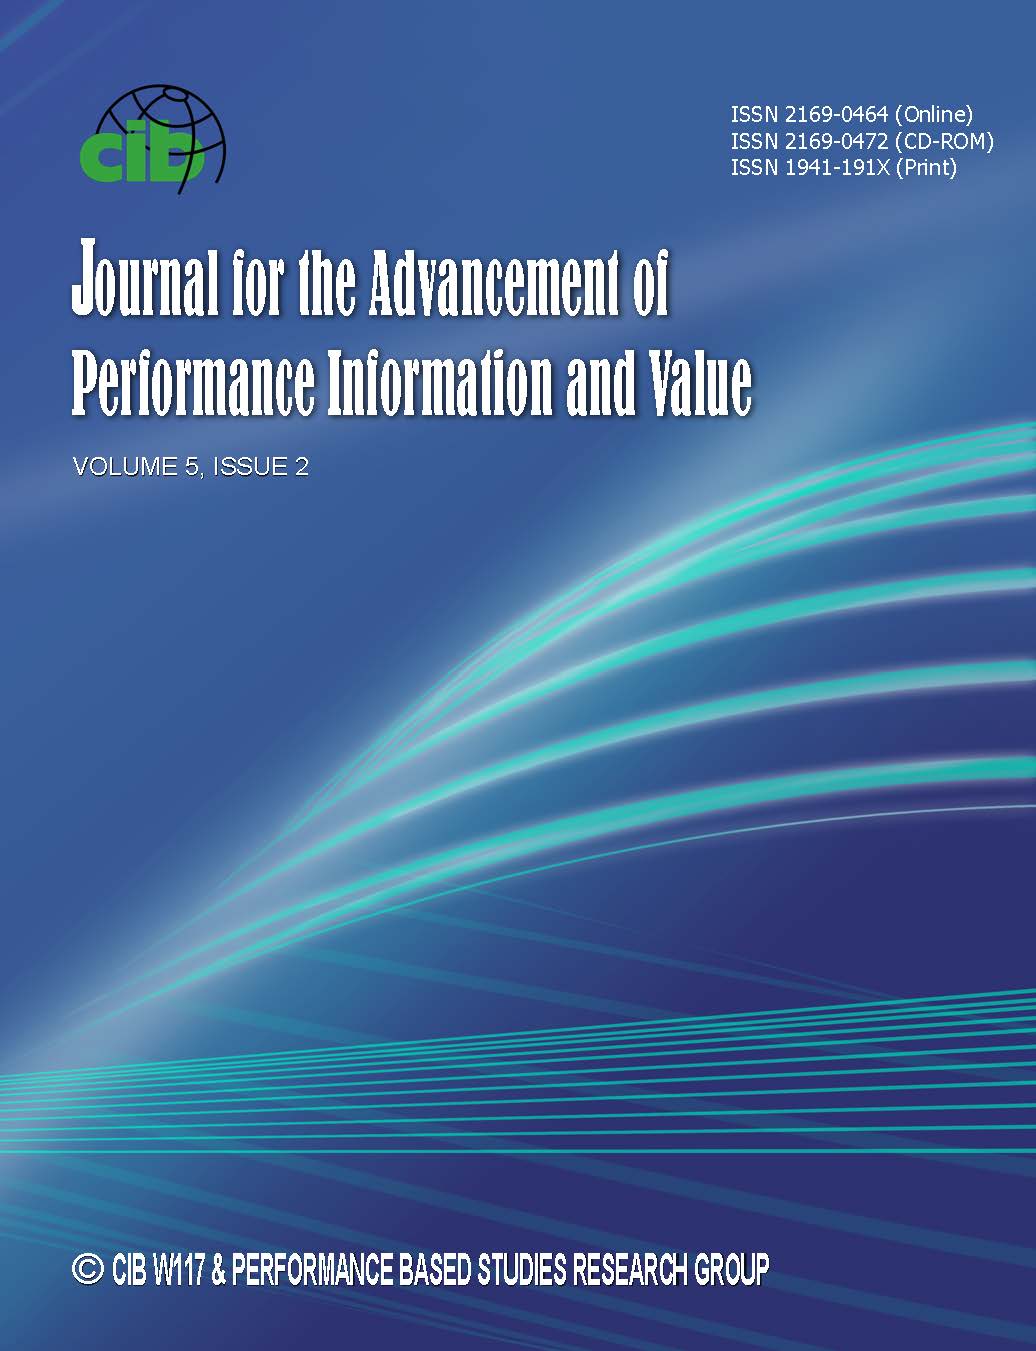 					View Vol. 5 No. 2 (2013): Journal for the Advancement of Performance Information and Value
				